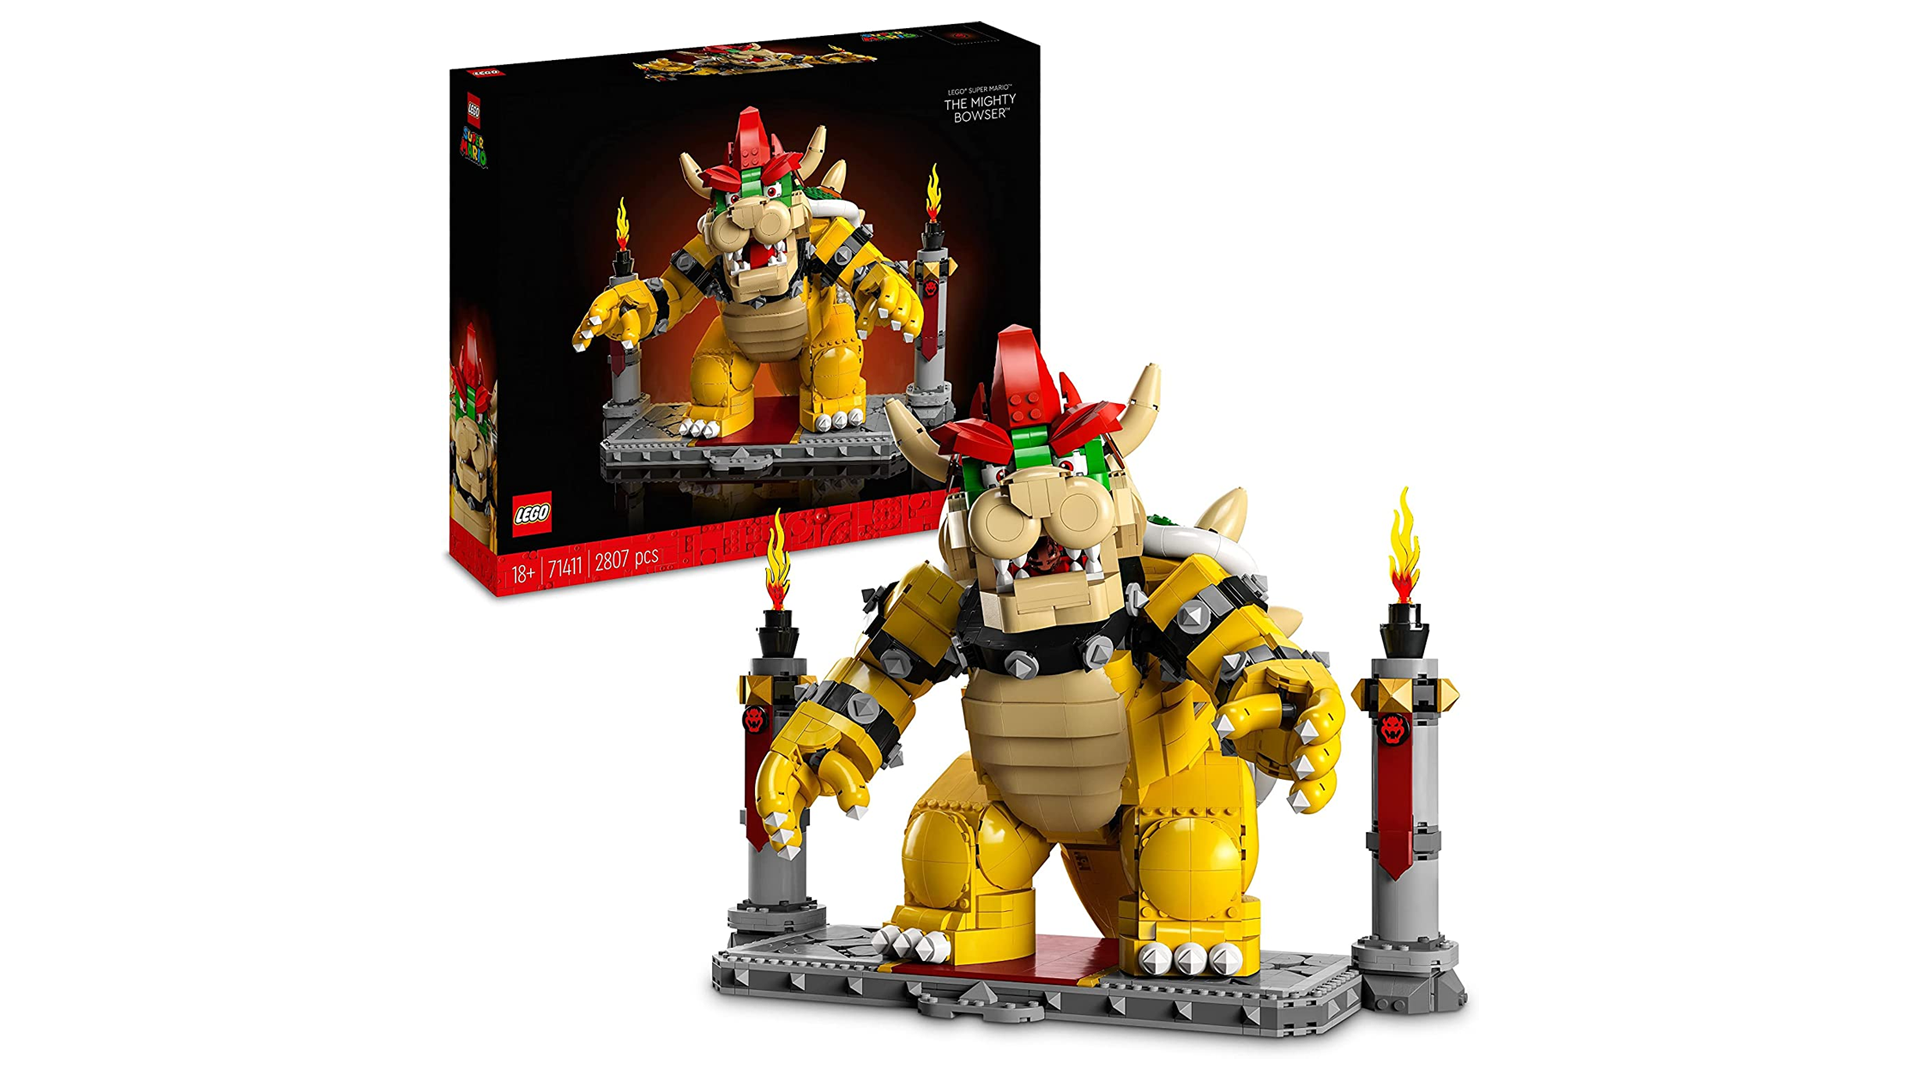 Image for Forget saving Princess Peach! Save yourself 25% on this Lego Super Mario The Mighty Bowser model at Amazon